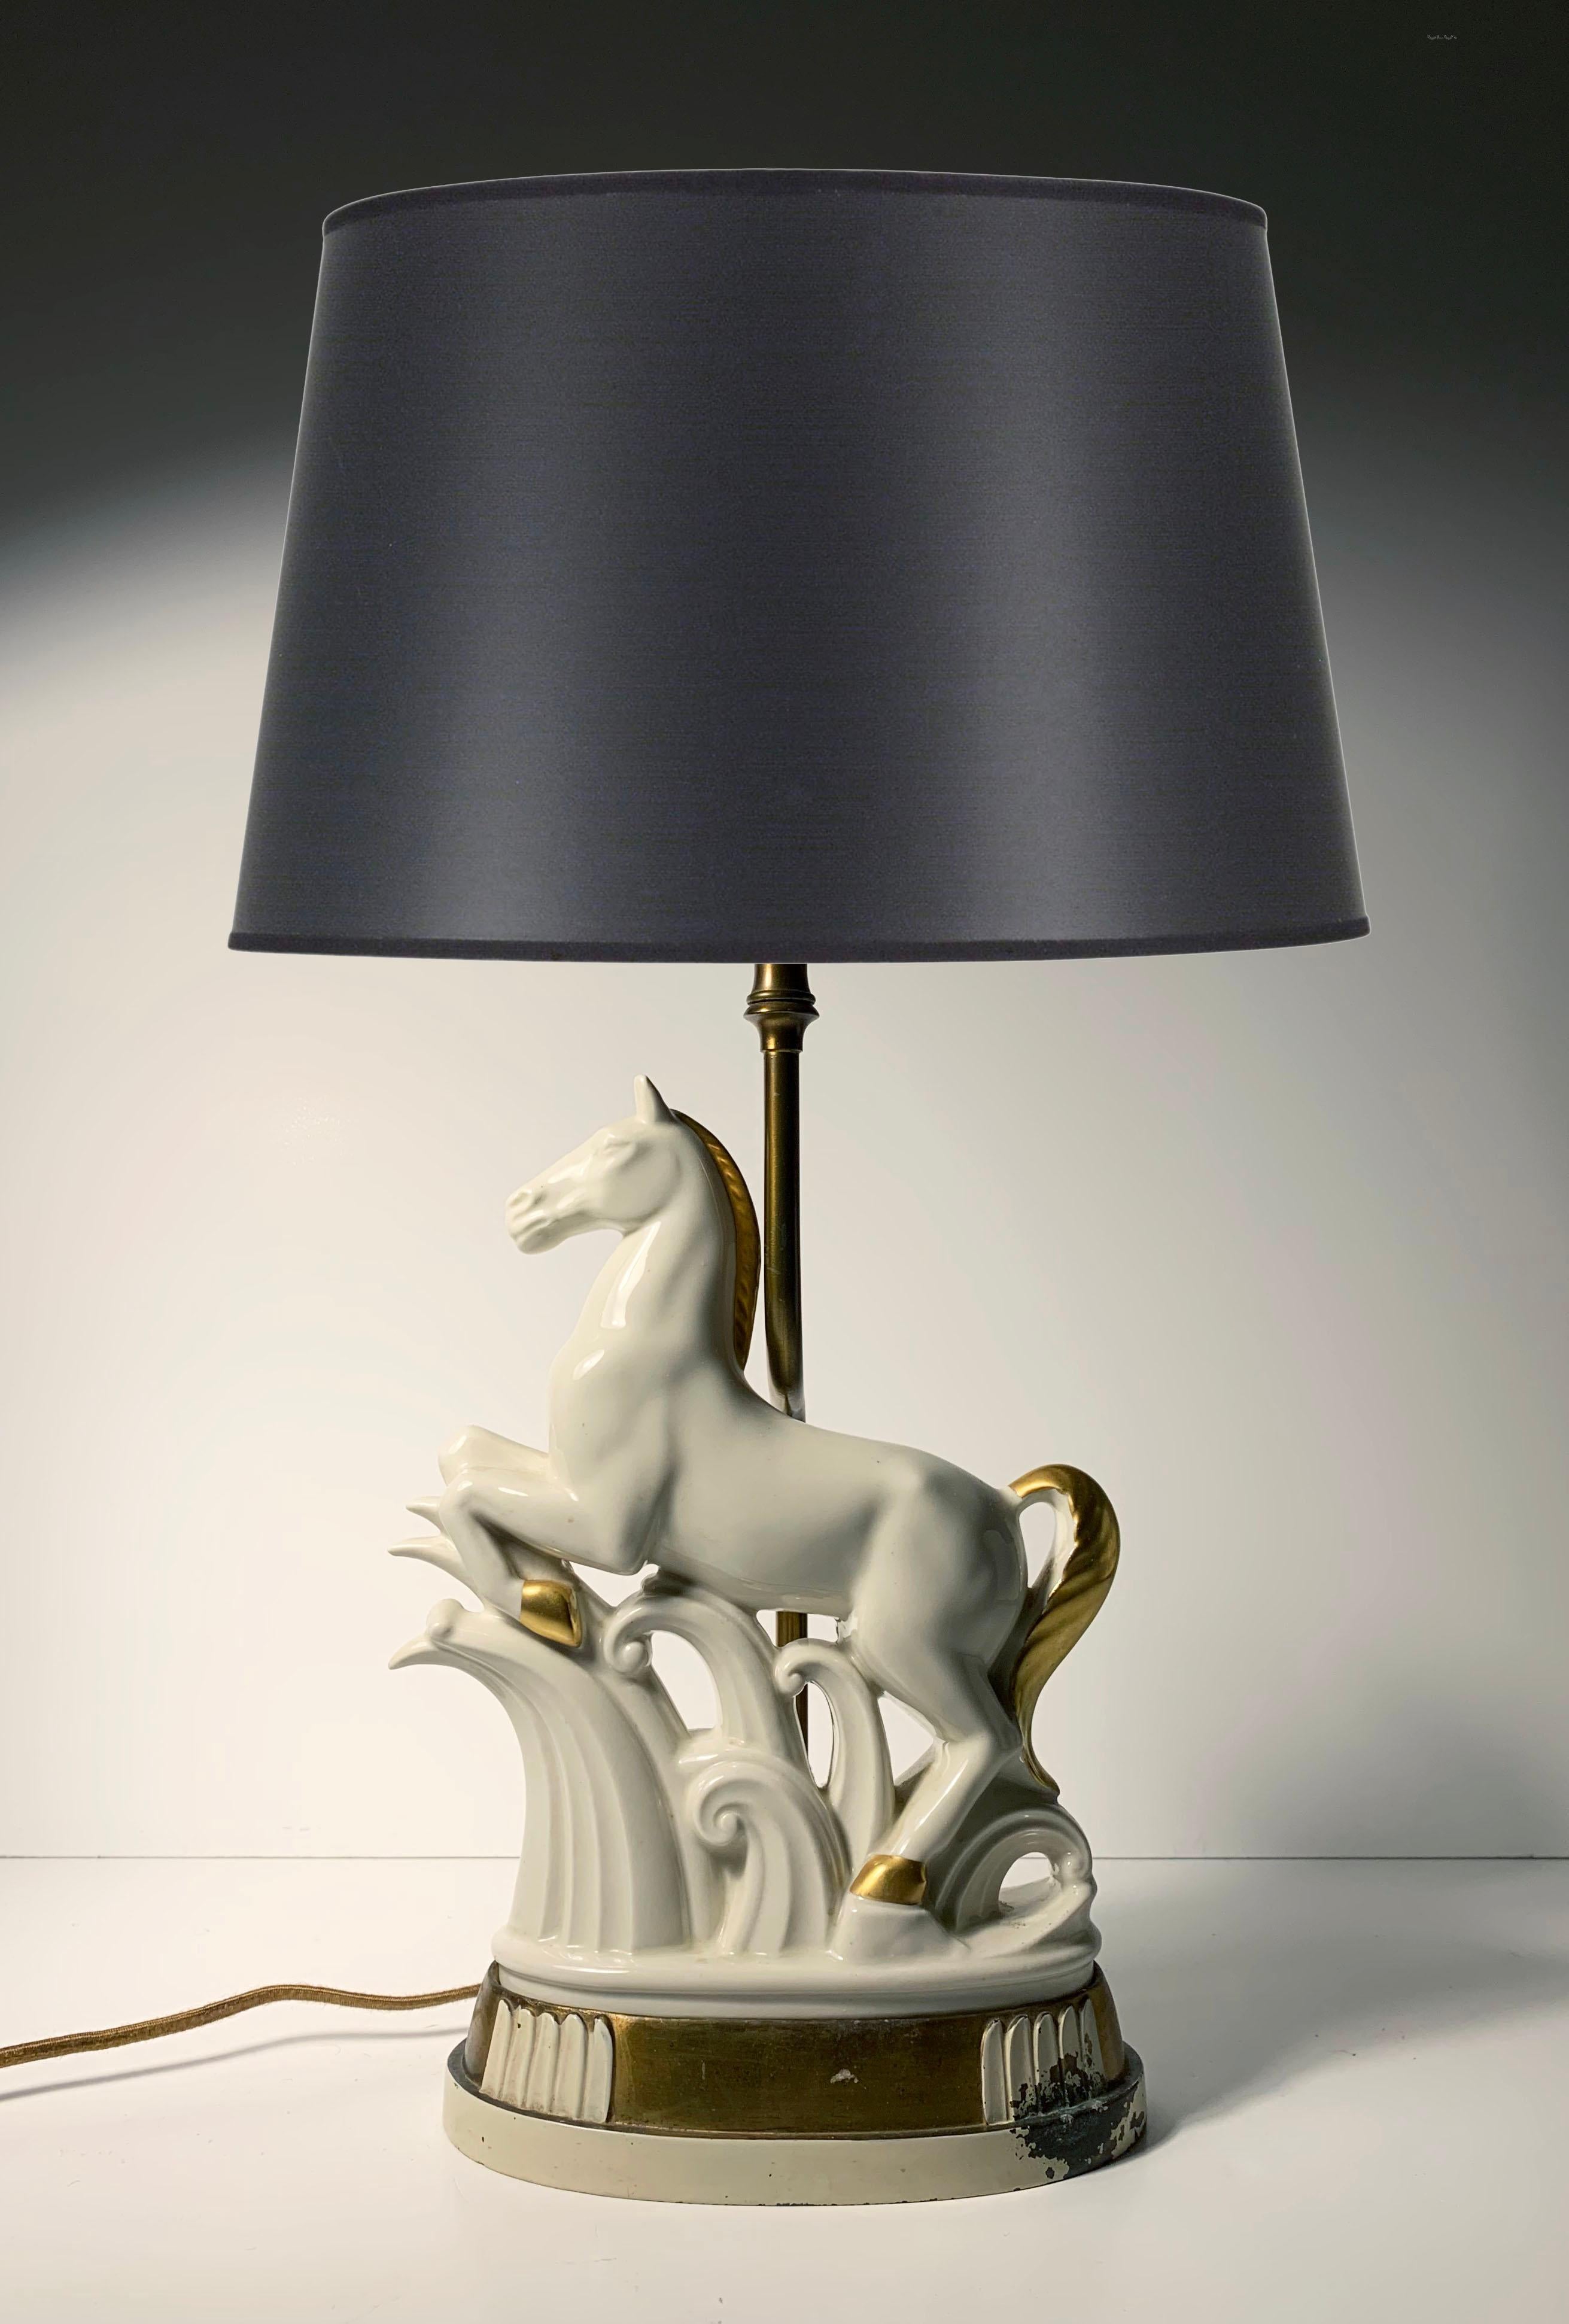 Art Deco Porcelain Horse Sculpture Lamp. A nice deco form. Not certain of origin or maker. There is no maker name on the porcelain. Only impressed model number. Most likely German in origin. 

Porcelain Sculpture sits in the base.. It is not